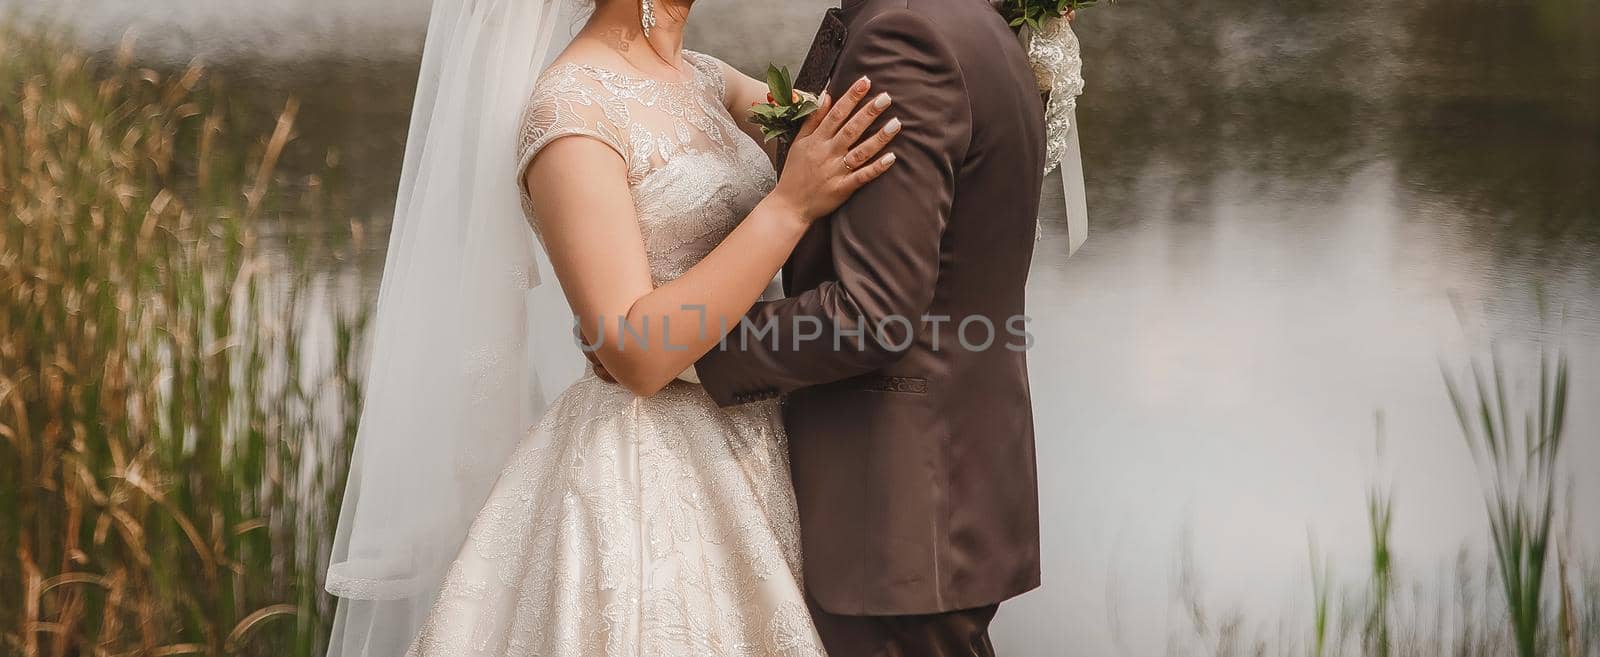 The bride put her hand on the groom's shoulder in a brown suit outdoor.